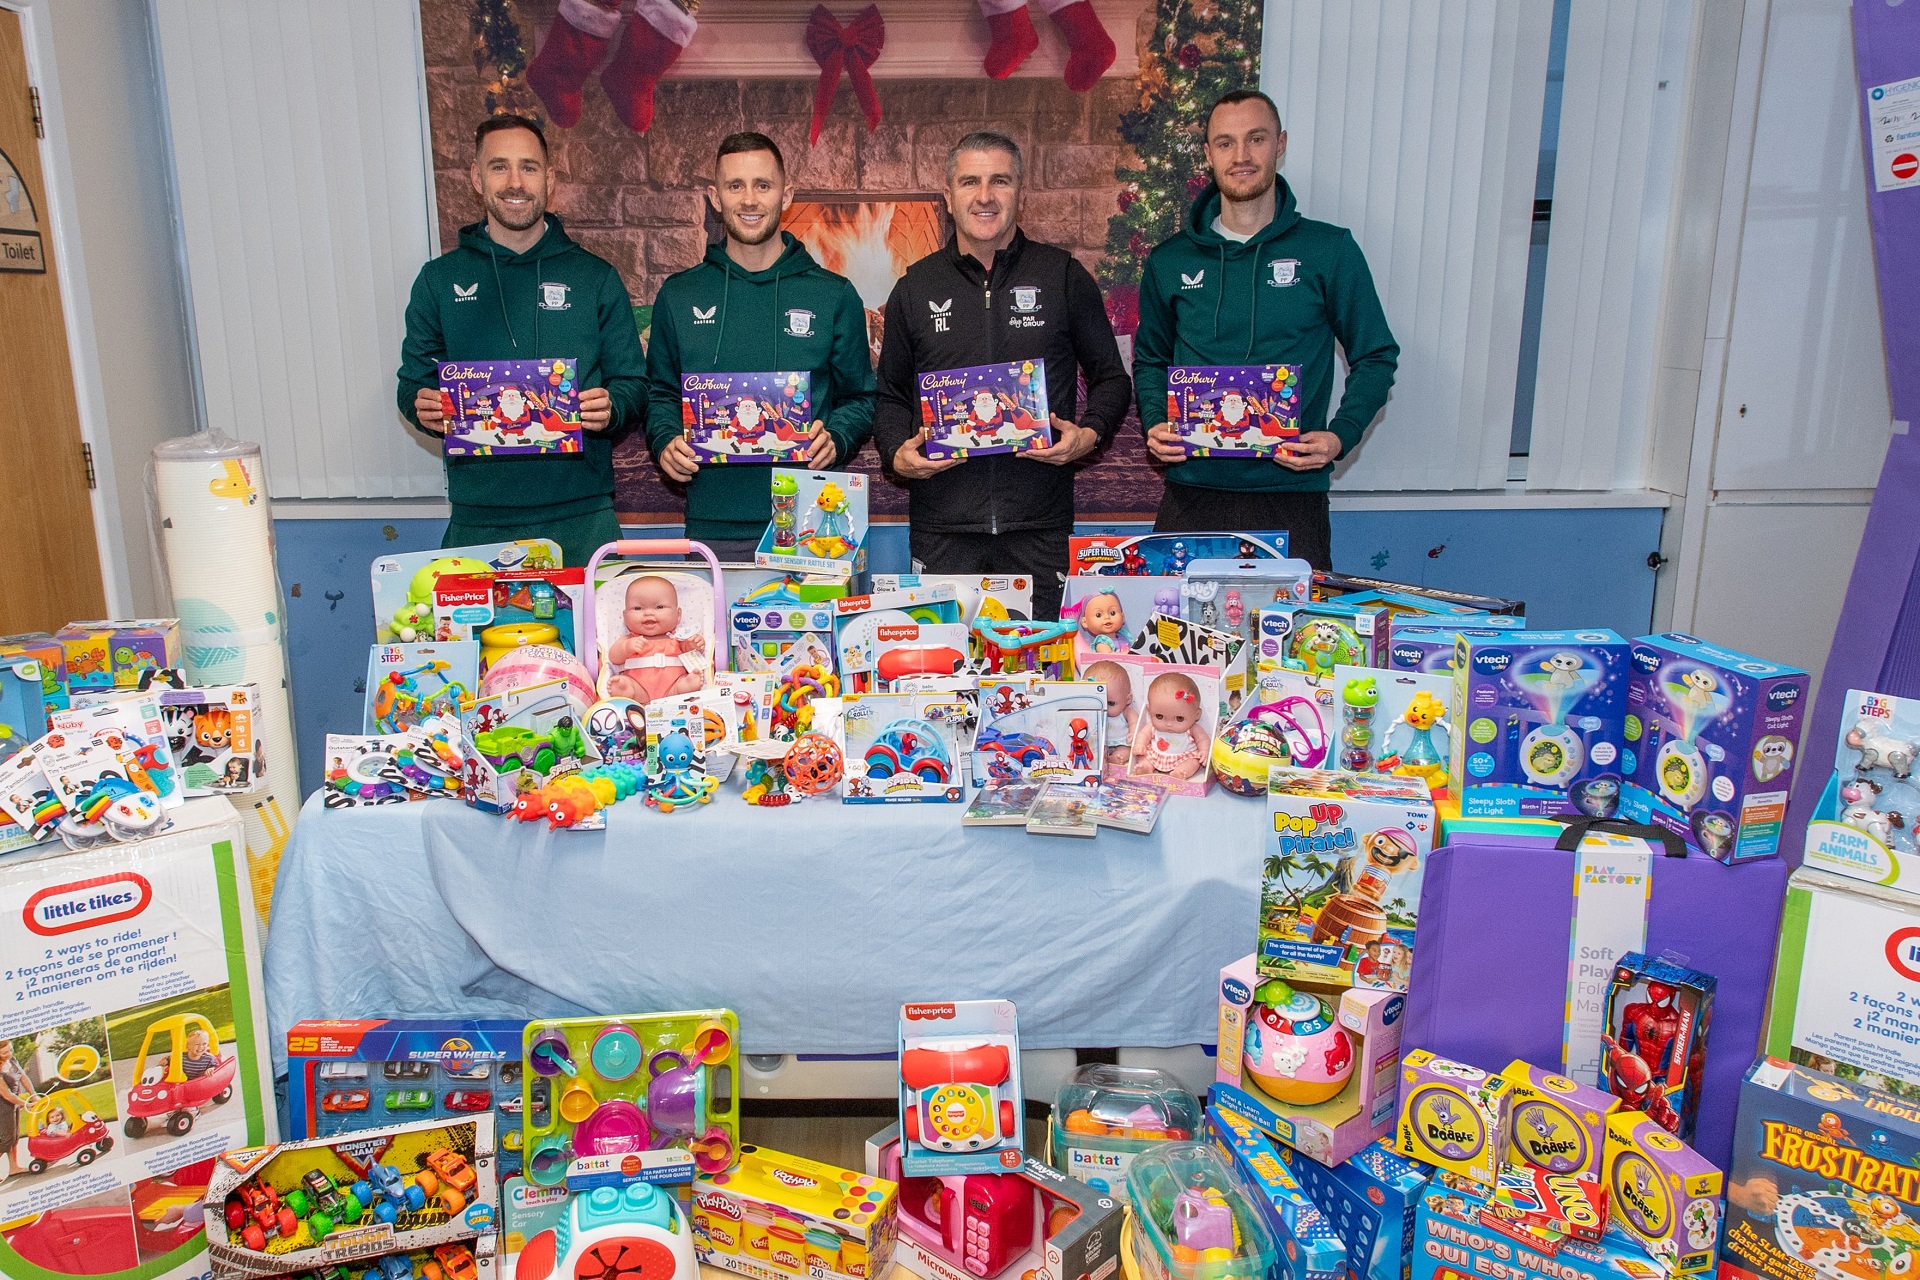 PNE  footballers standing behind a table full of toys and gifts